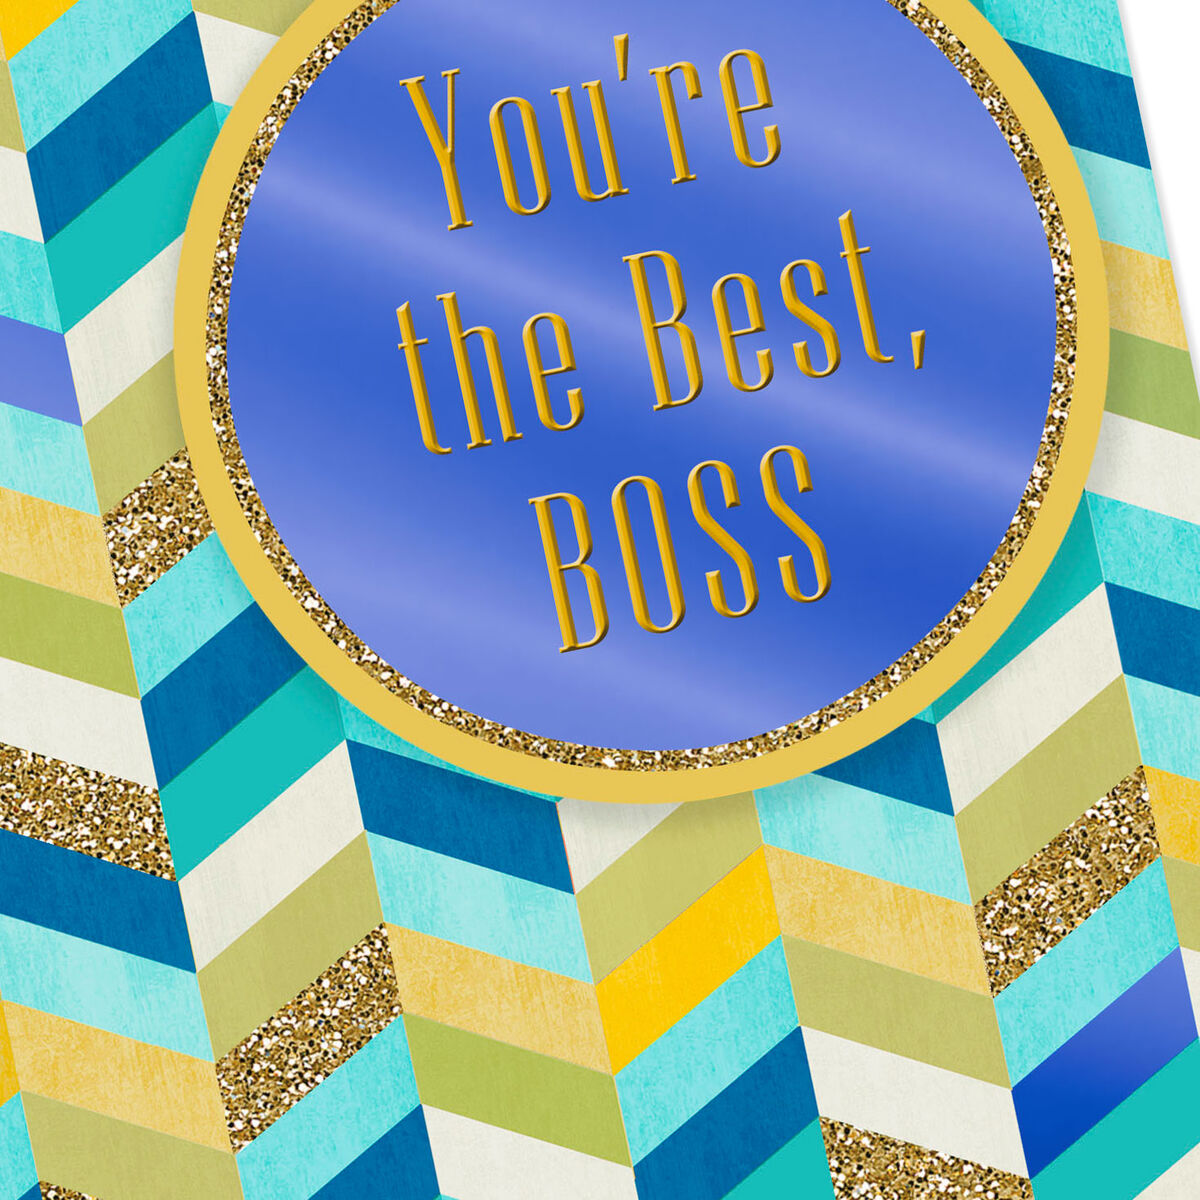 Chevron Pattern You're the Best Boss's Day Card - Greeting Cards - Hallmark